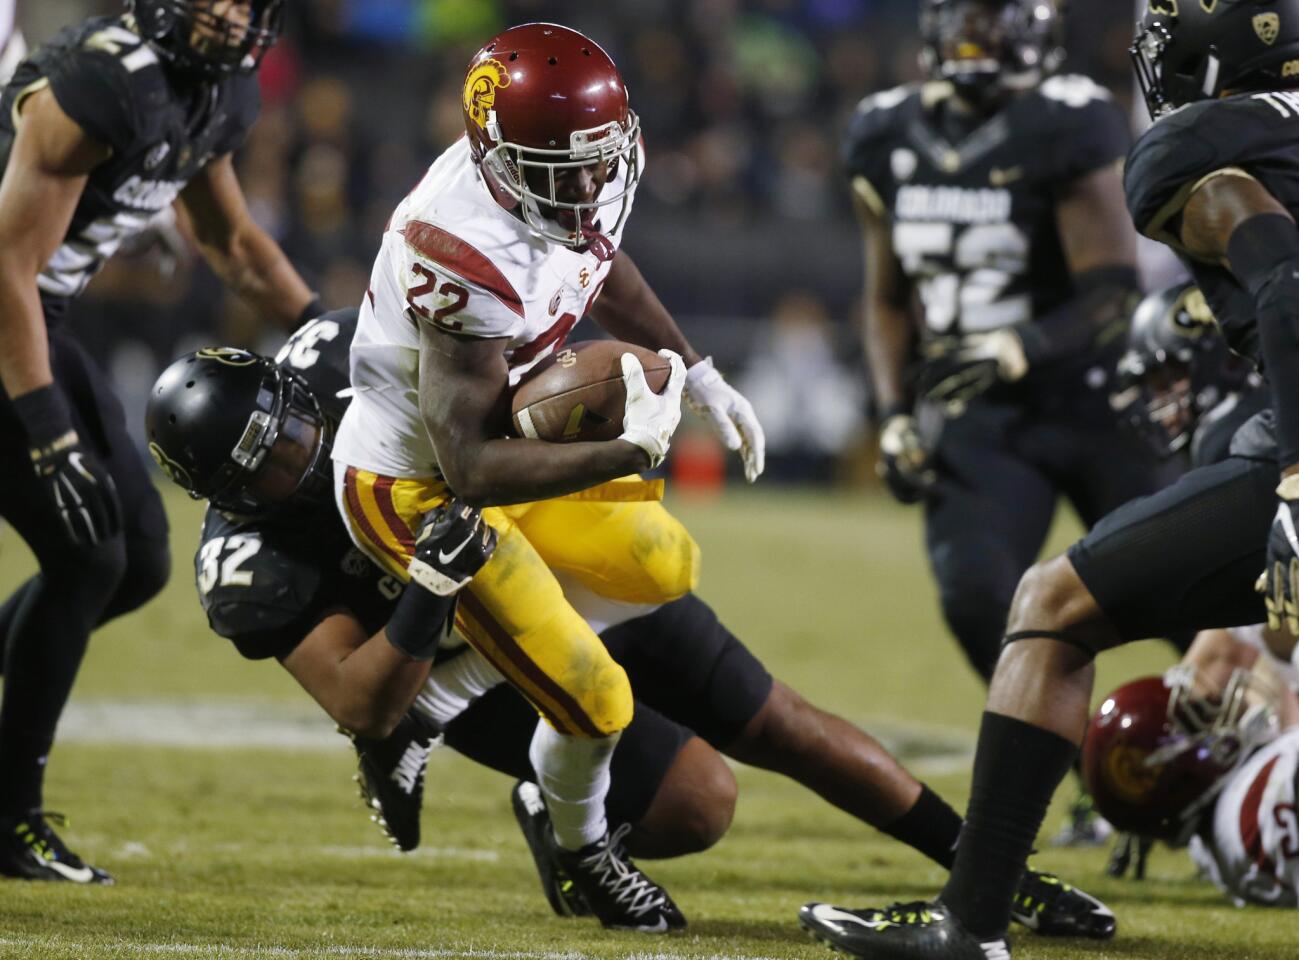 Five things we learned in USC's 27-24 victory over Colorado